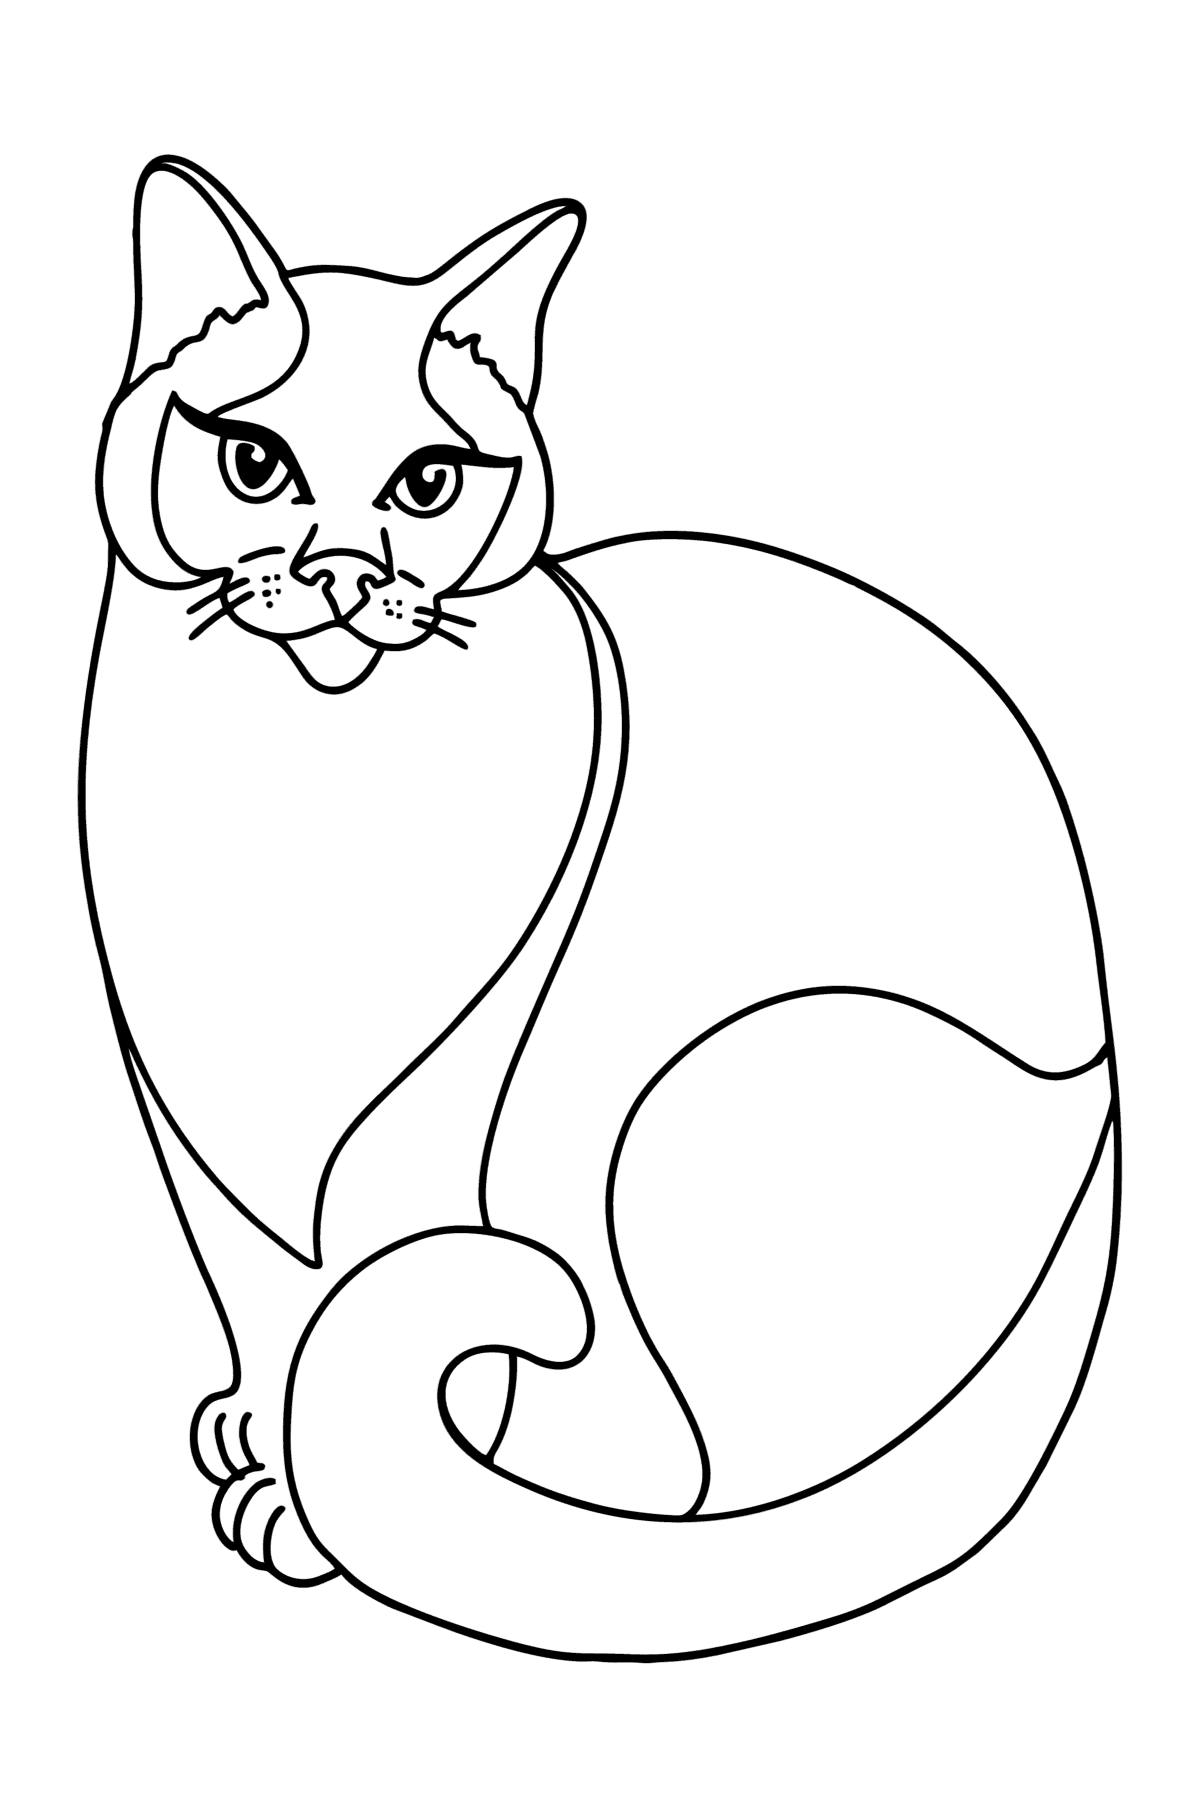 Siamese Cat coloring page - Coloring Pages for Kids